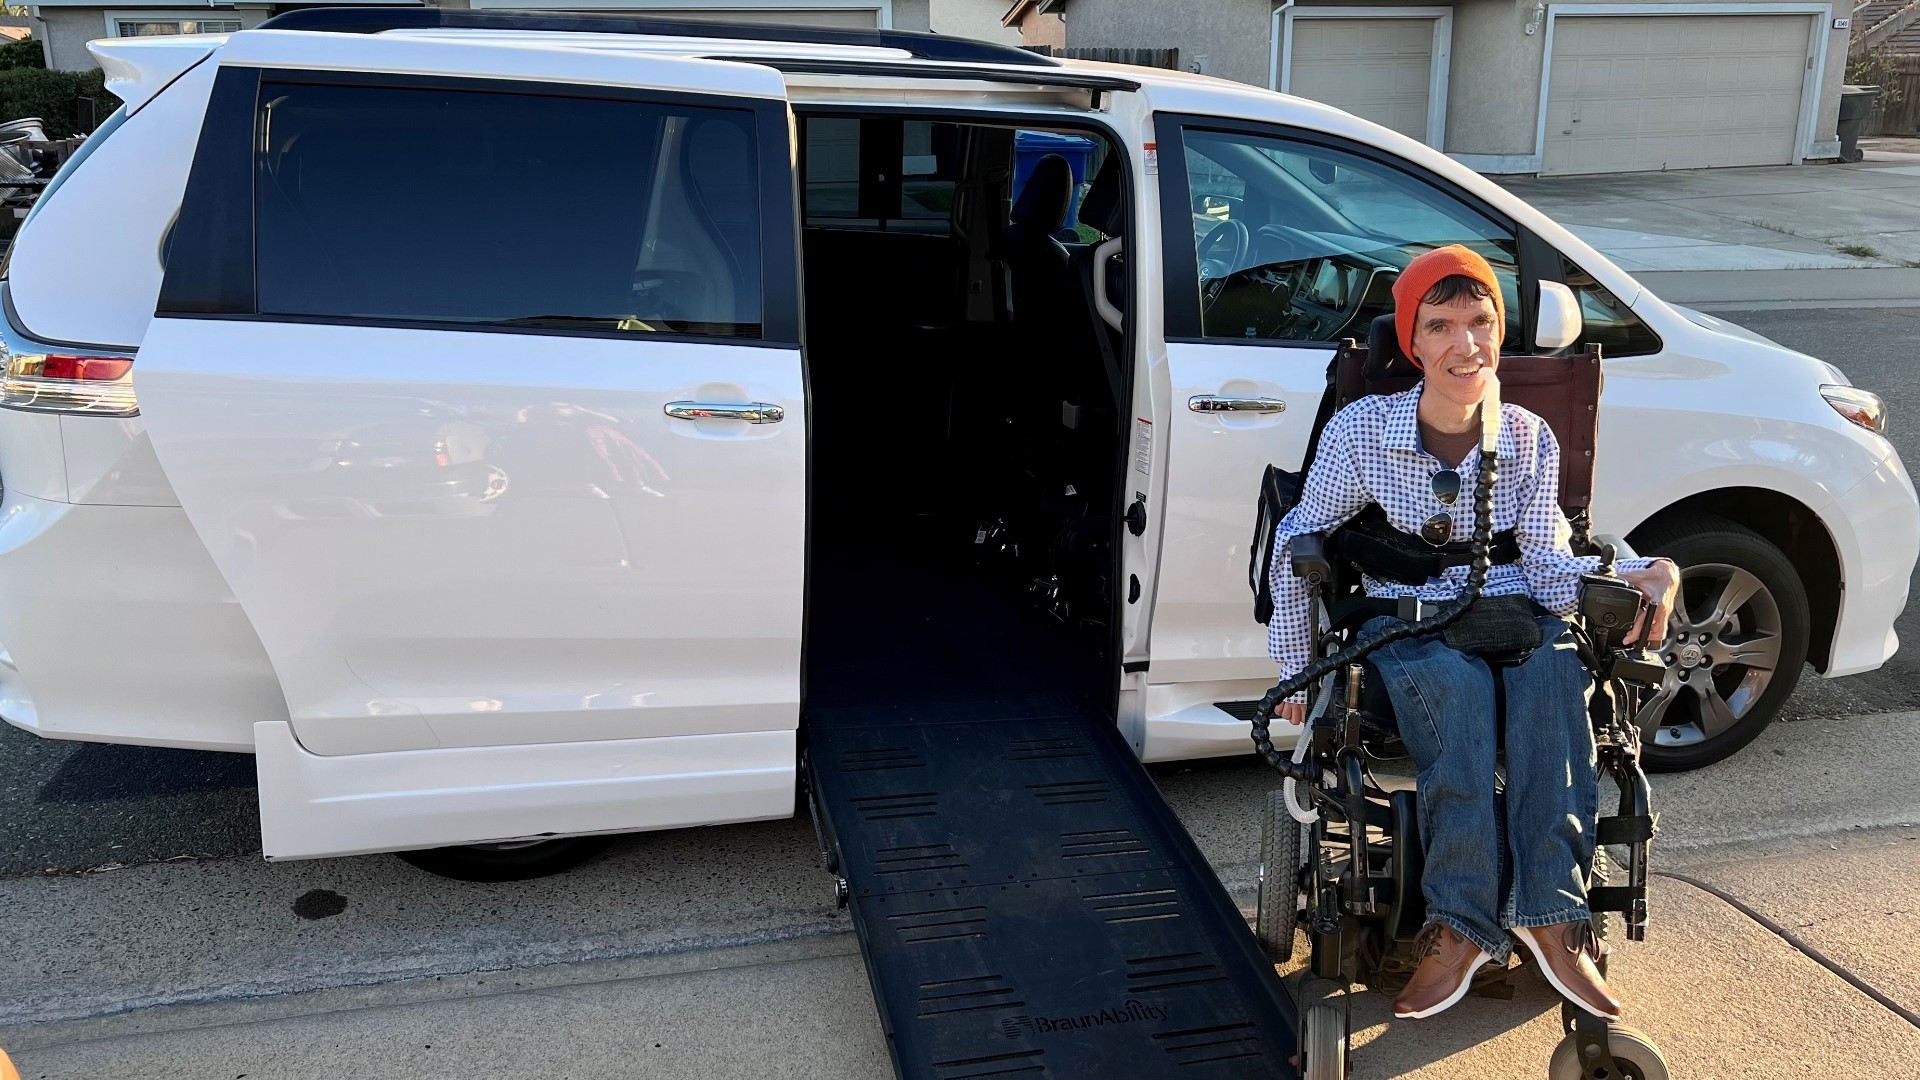 With the help of a GoFundMe campaign raising more than $14,000, John Kerr was able to find a new wheelchair-accessible van online that met his needs.